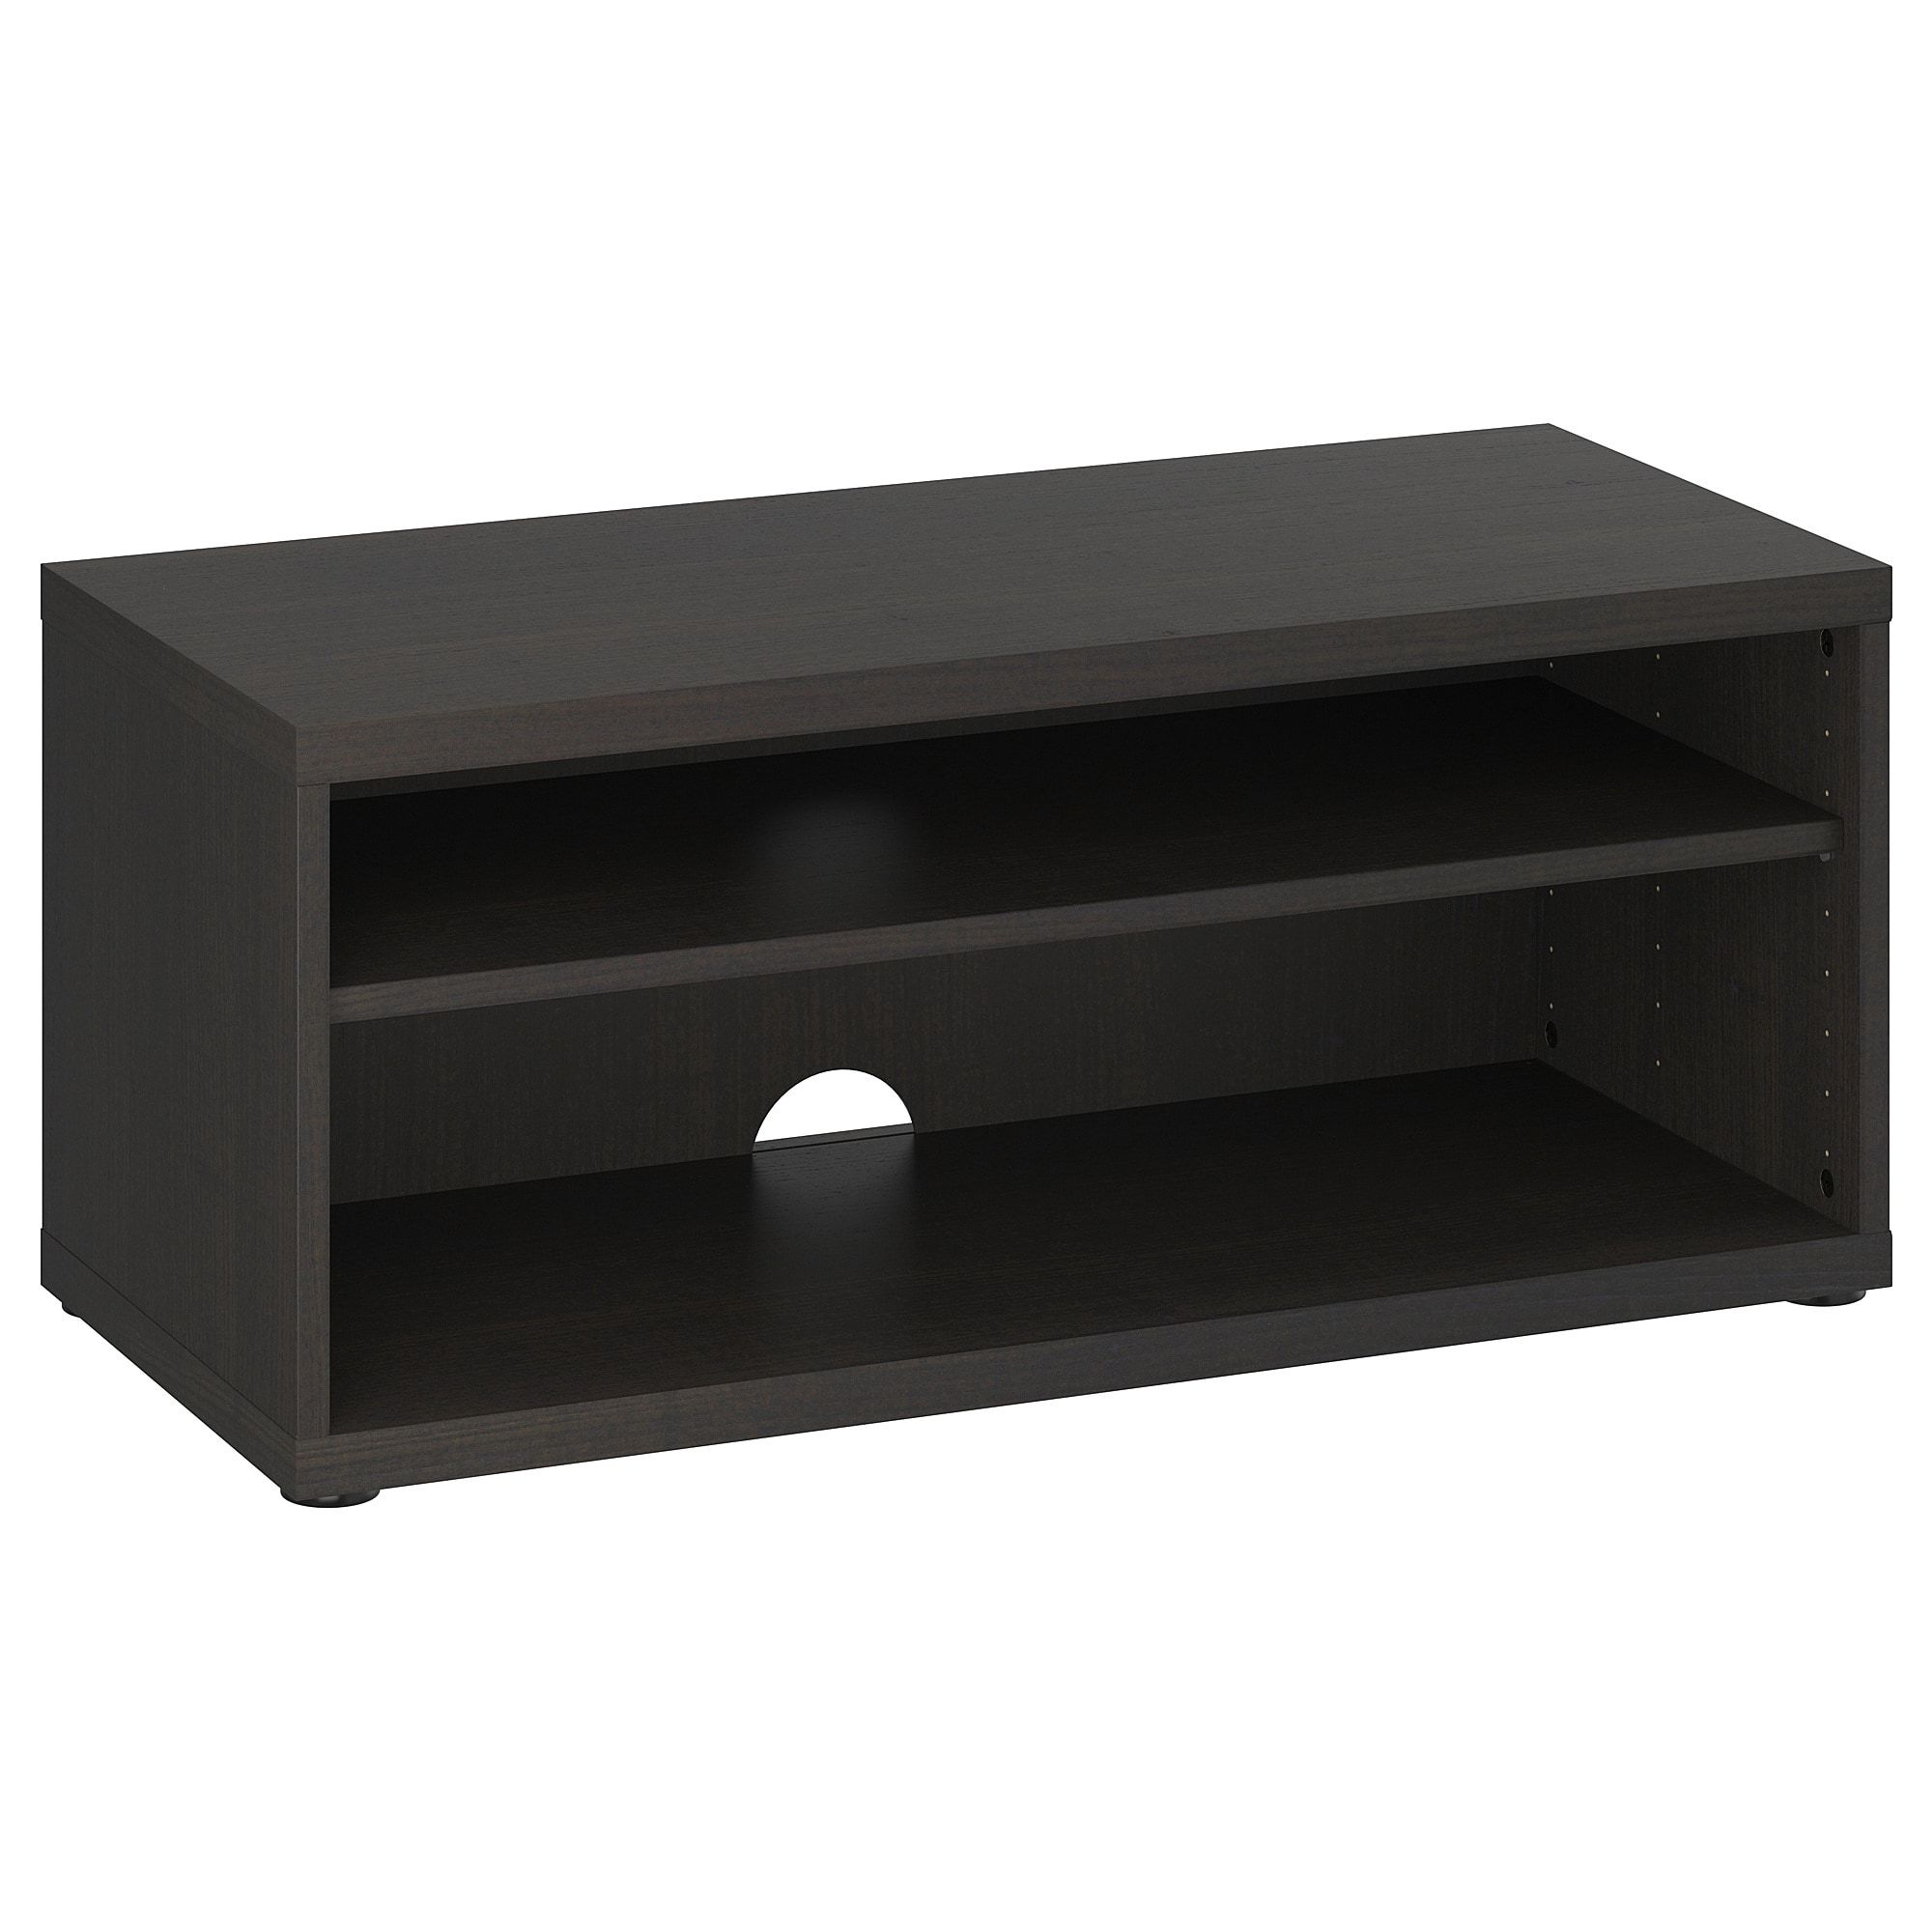 Famous Tv Units Black Intended For Tv Stands & Tv Units (View 5 of 20)